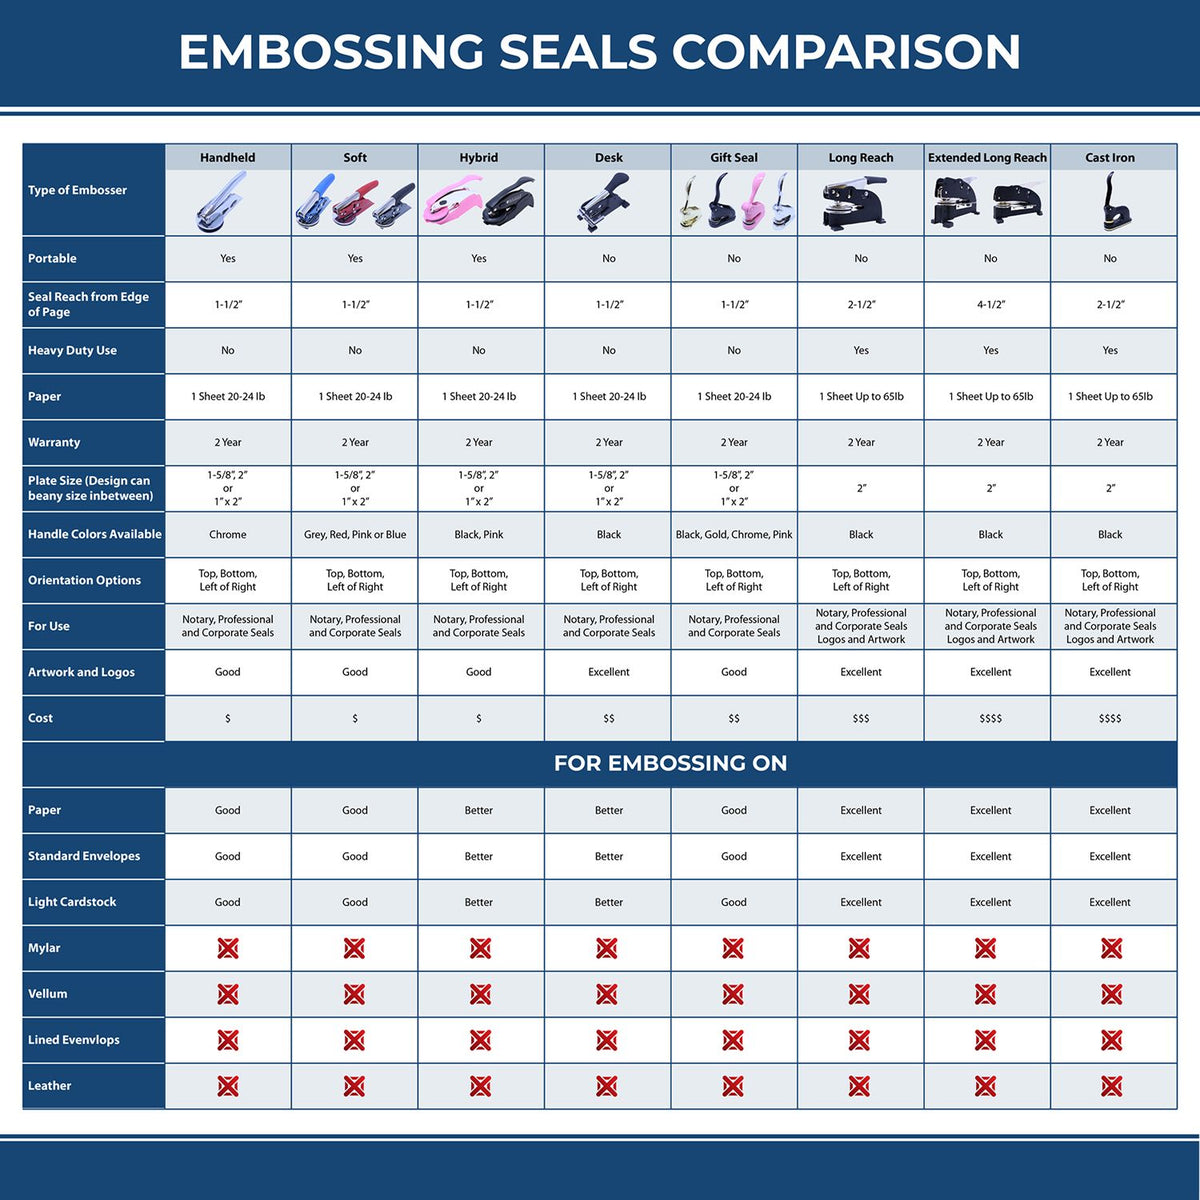 A comparison chart for the different types of mount models available for the Hybrid Kansas Architect Seal